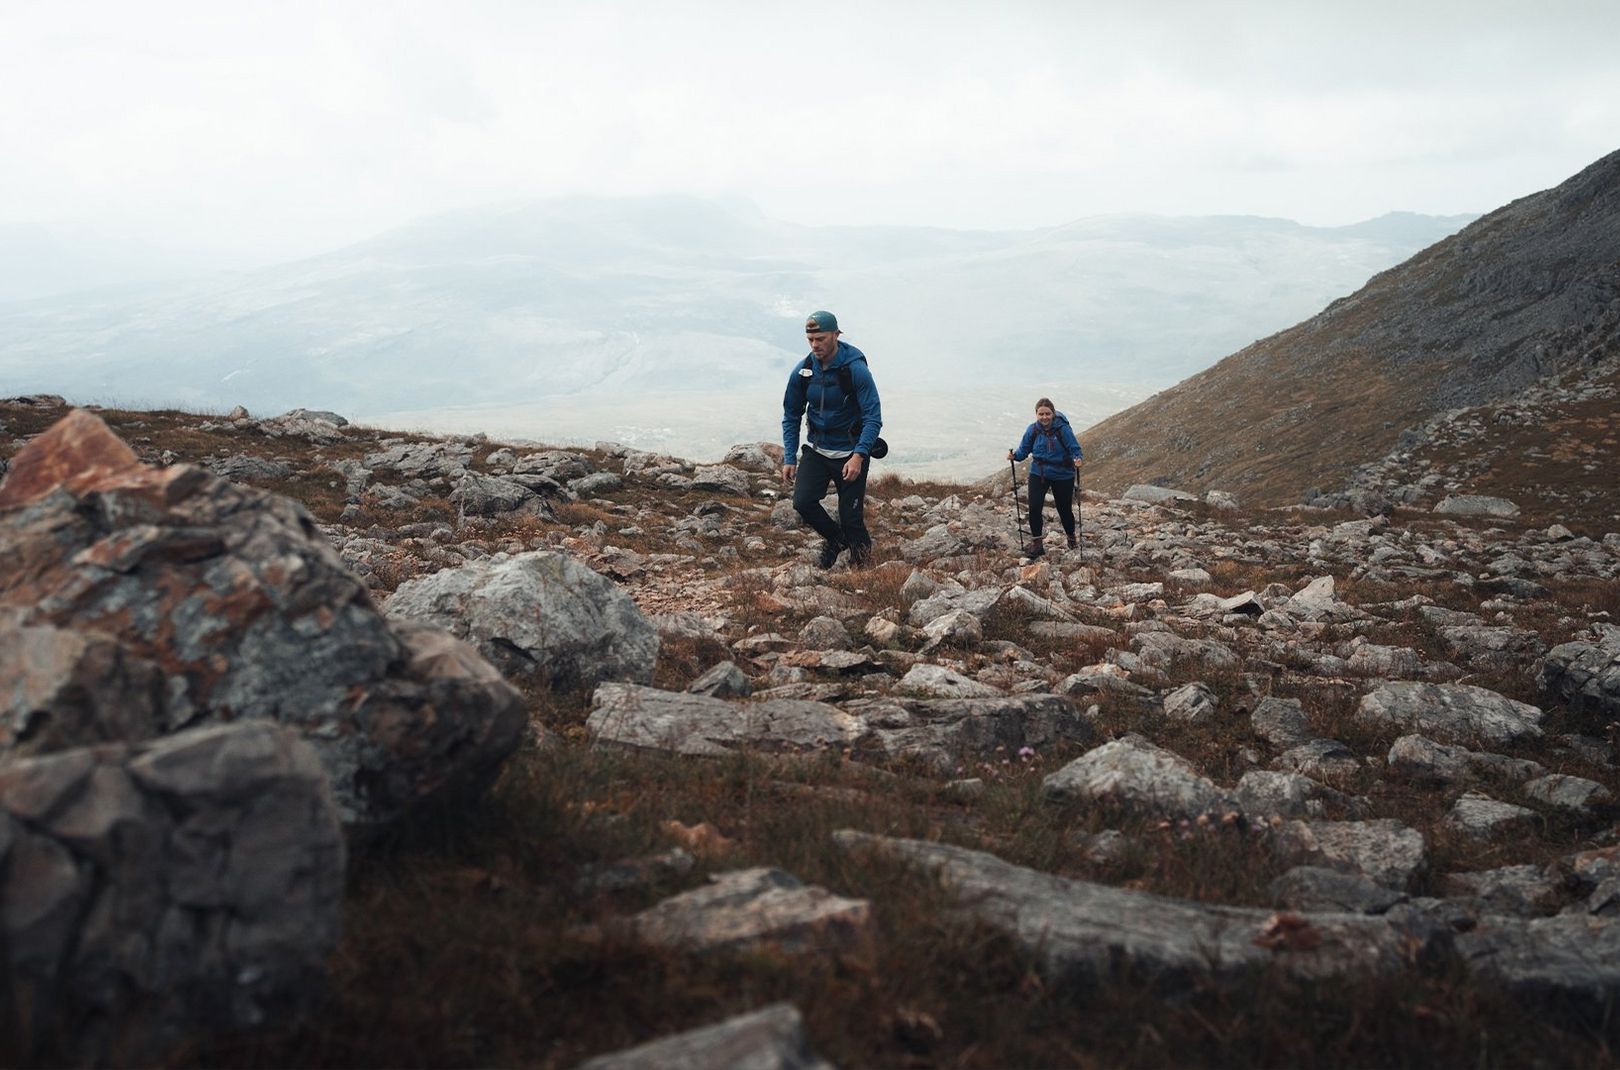 A couple hiking up a rocky mountain path in Scotland